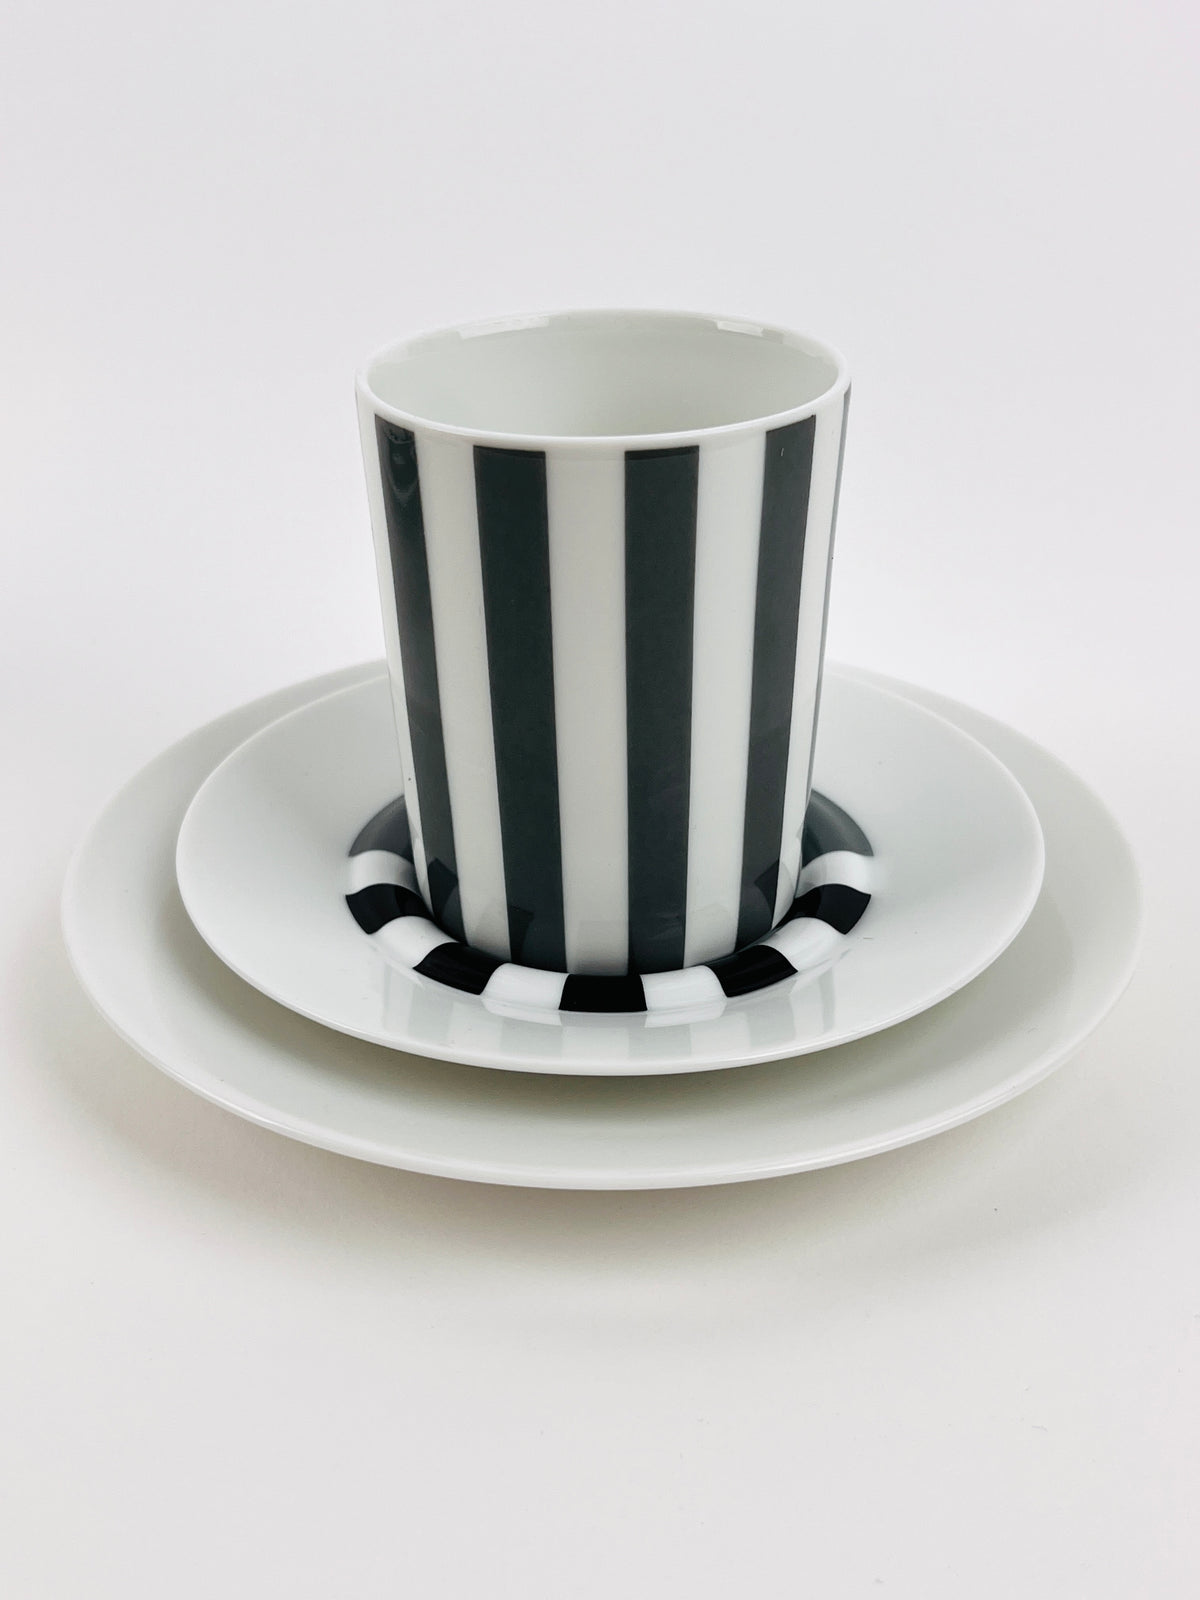 Postmodern Cupola Strada Cups & Saucers by Mario Bellini for Rosenthal Studio Line